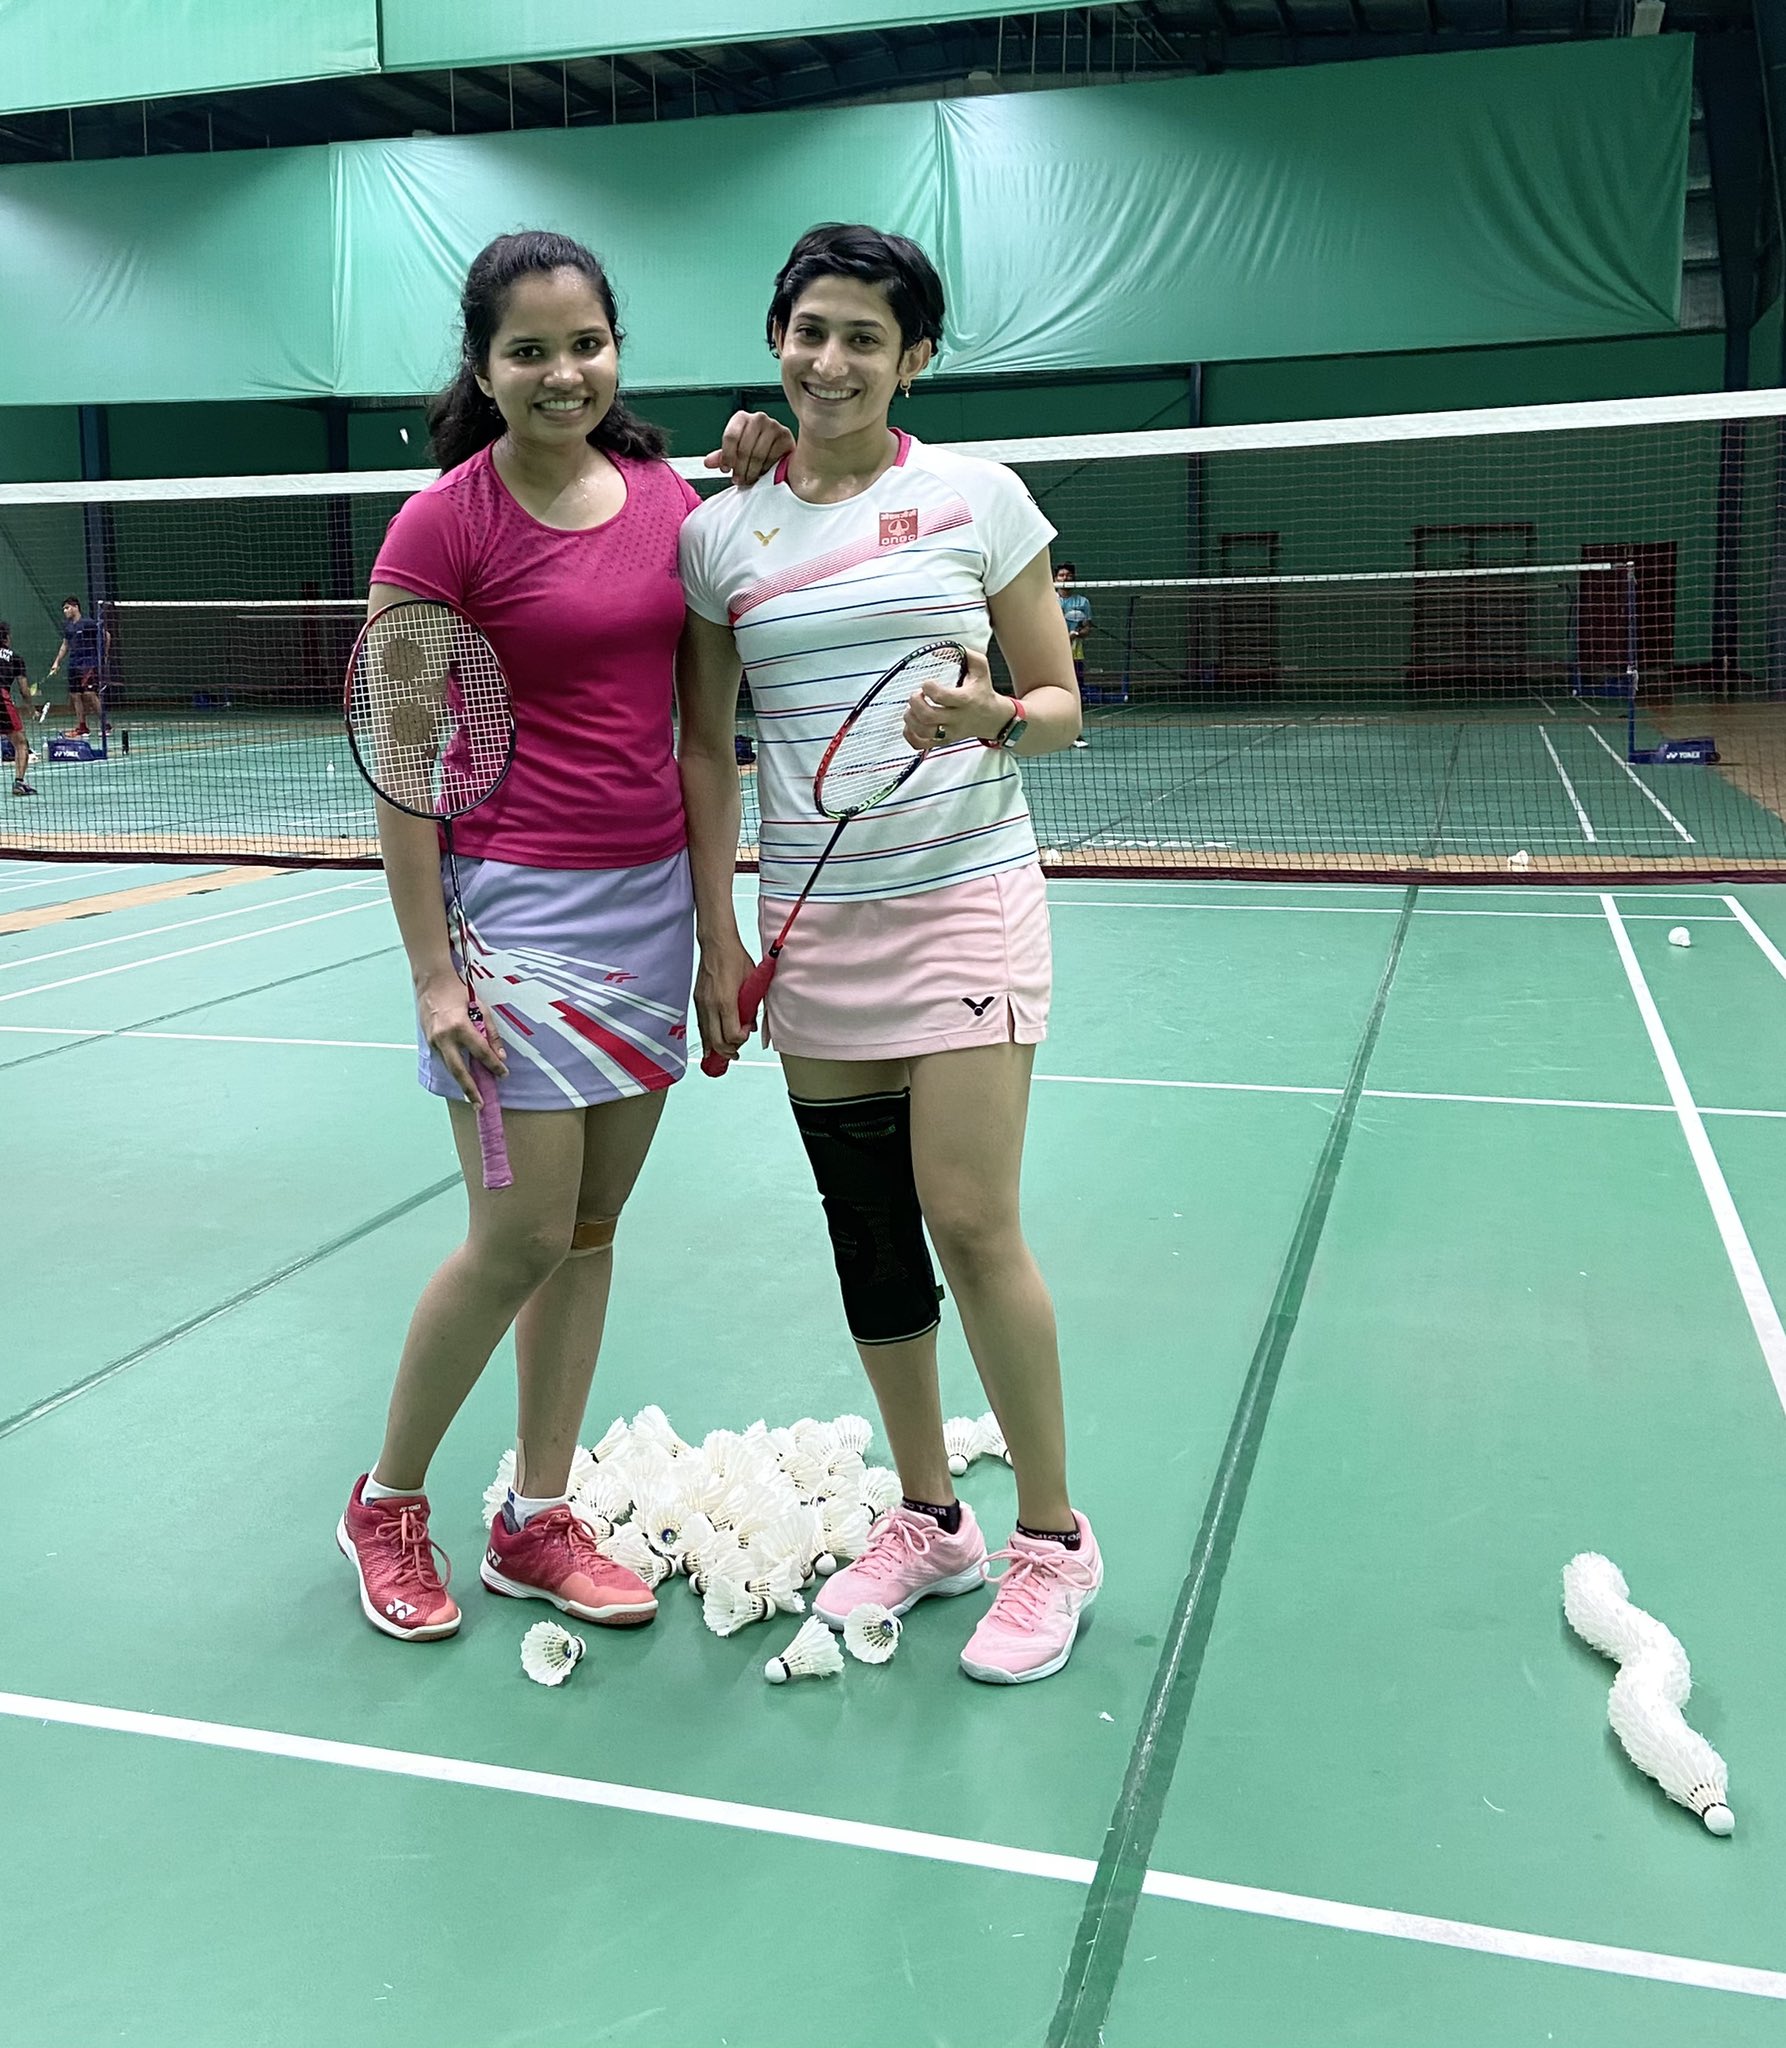 2021 Hylo Open | Ashwini Ponappa and N Sikki Reddy duo advance to the second round